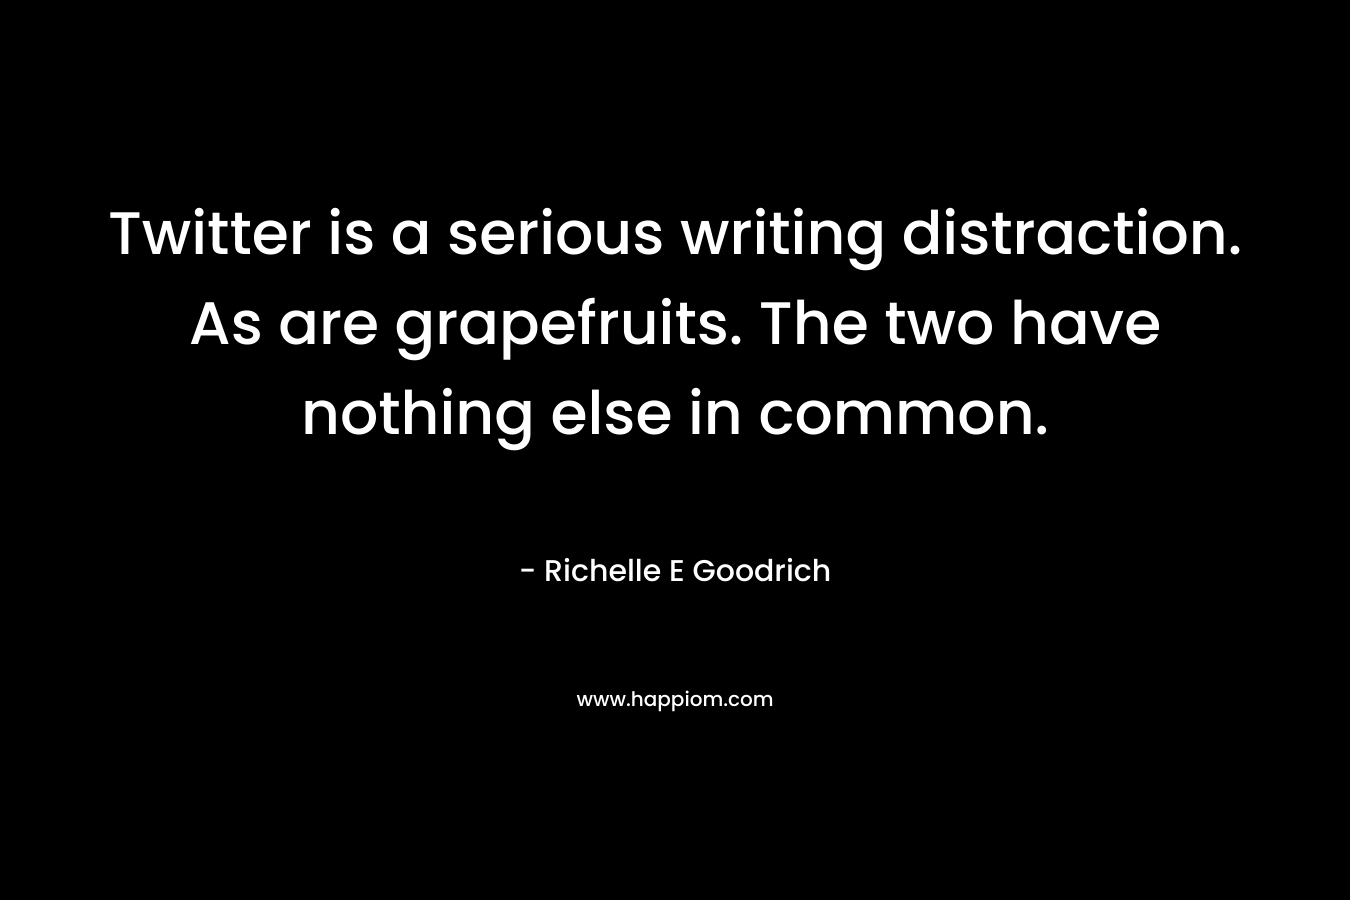 Twitter is a serious writing distraction. As are grapefruits. The two have nothing else in common. – Richelle E Goodrich